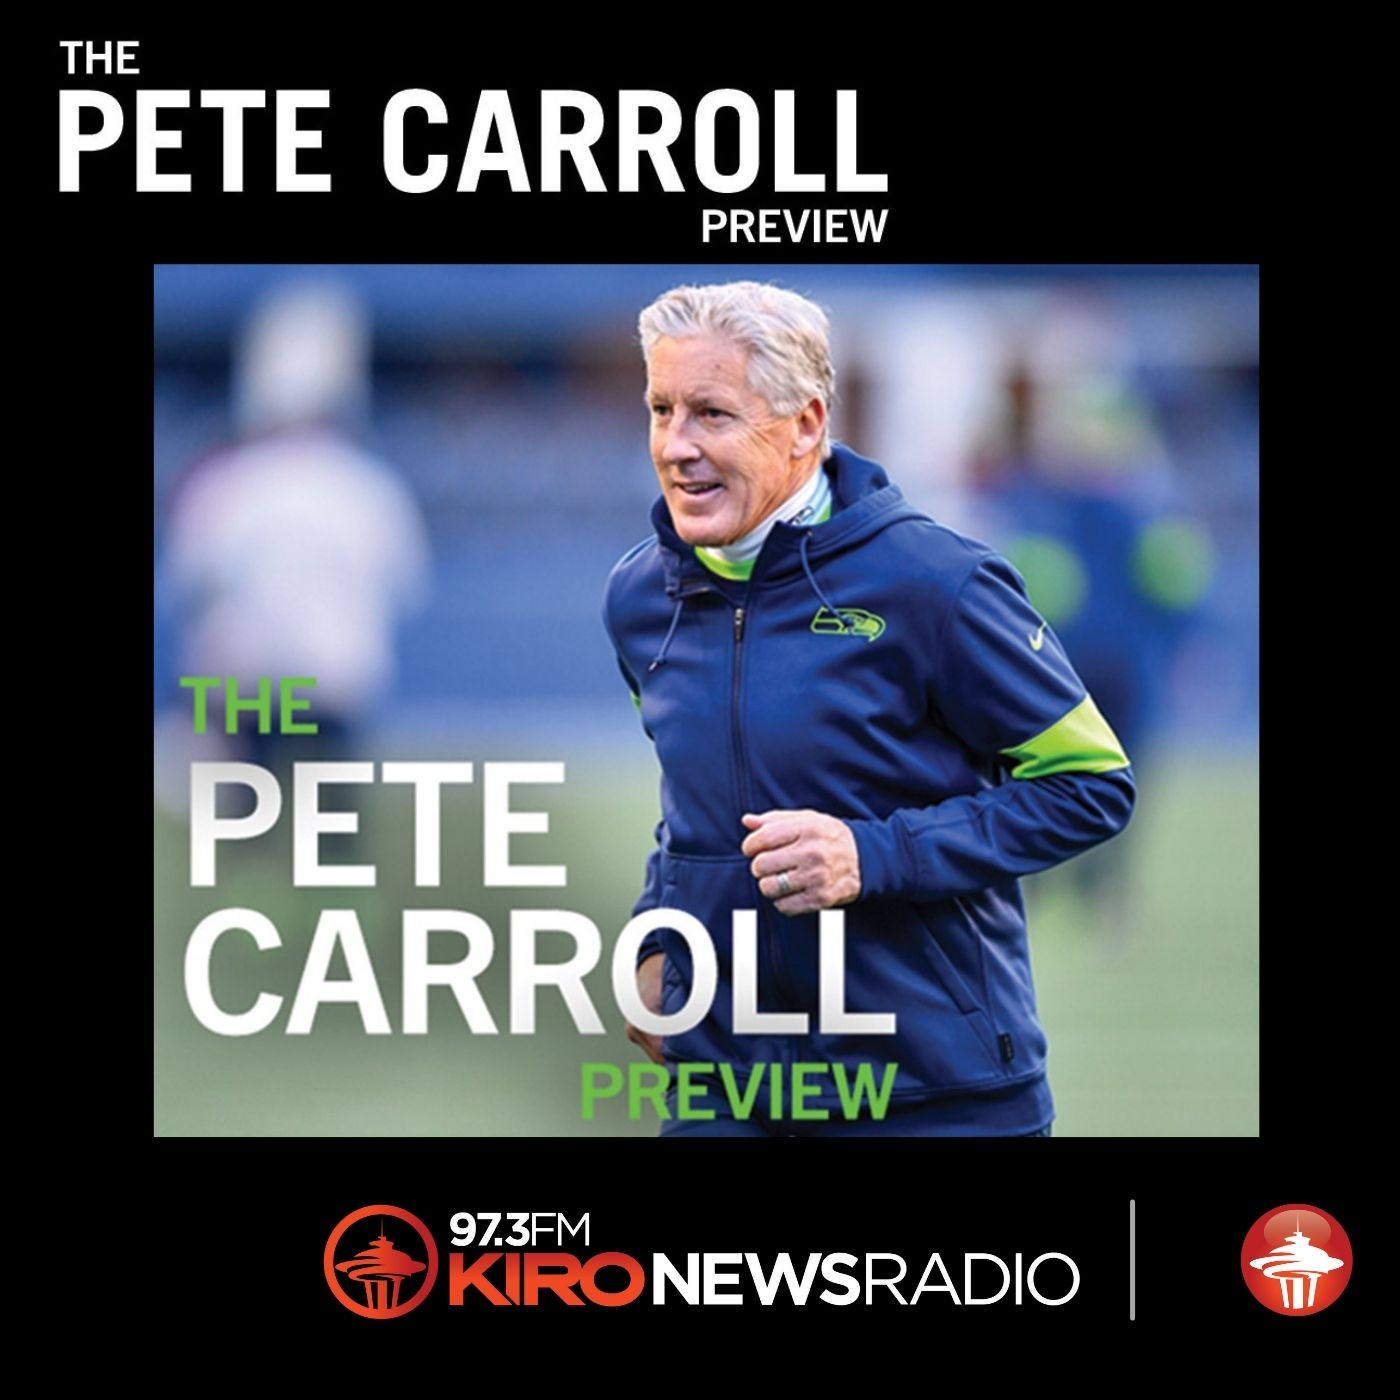 Pete Carroll Preview: Must-win against L.A., Bobby Wagner's return